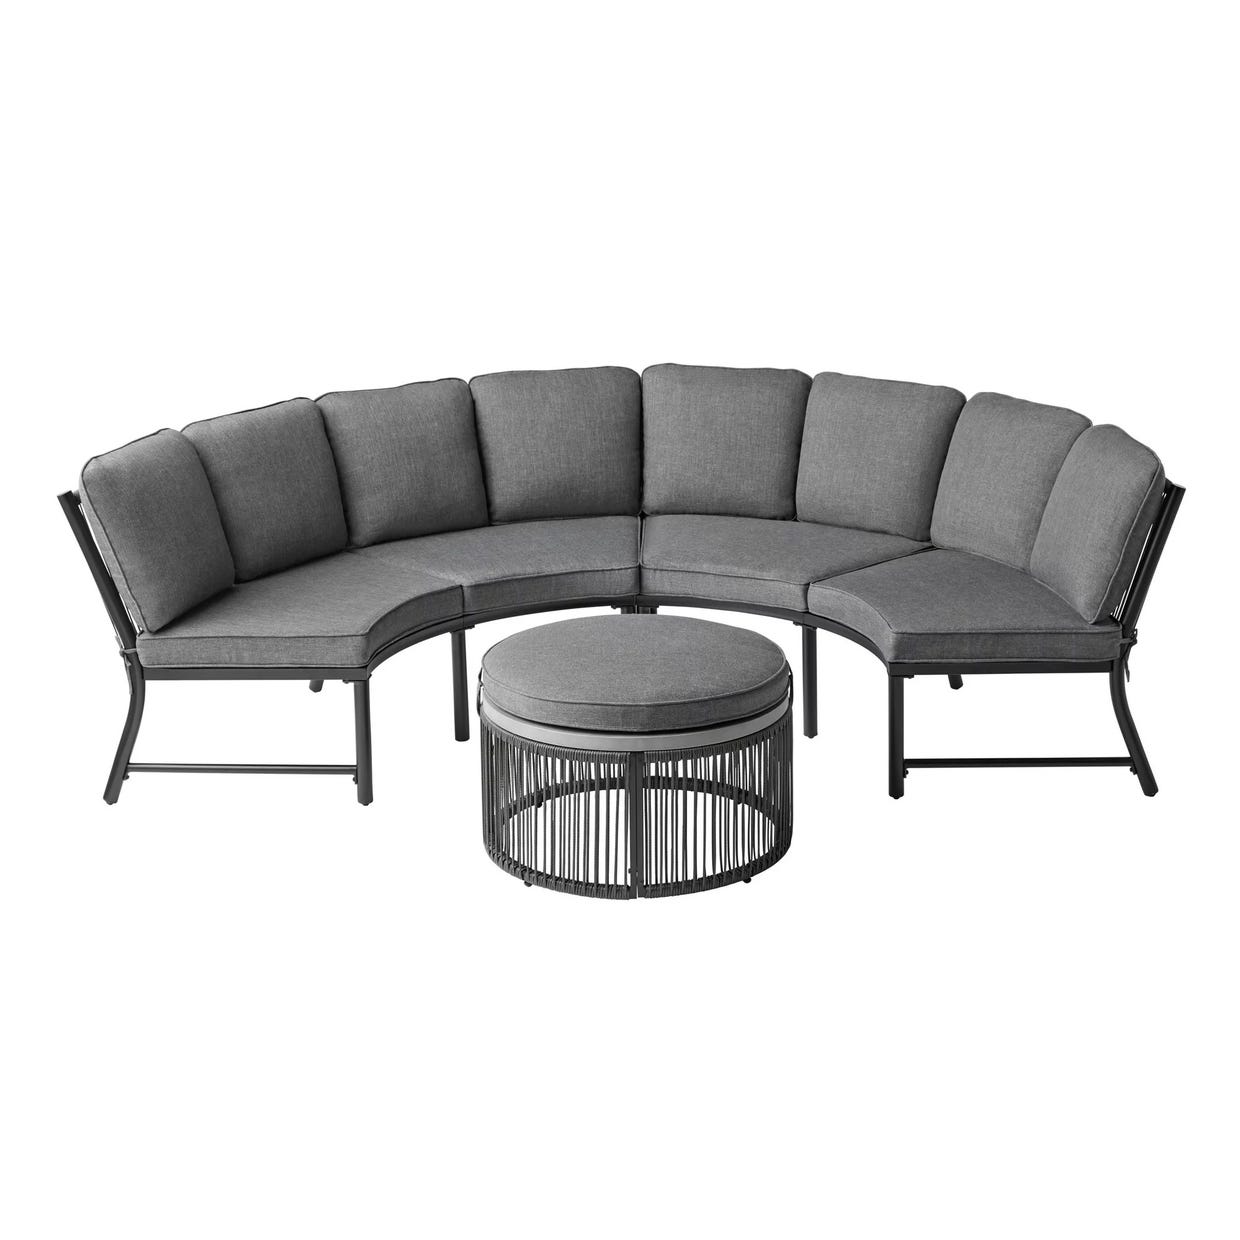 A curved outdoor sectional sofa with cushions and a round coffee table with a slatted design.